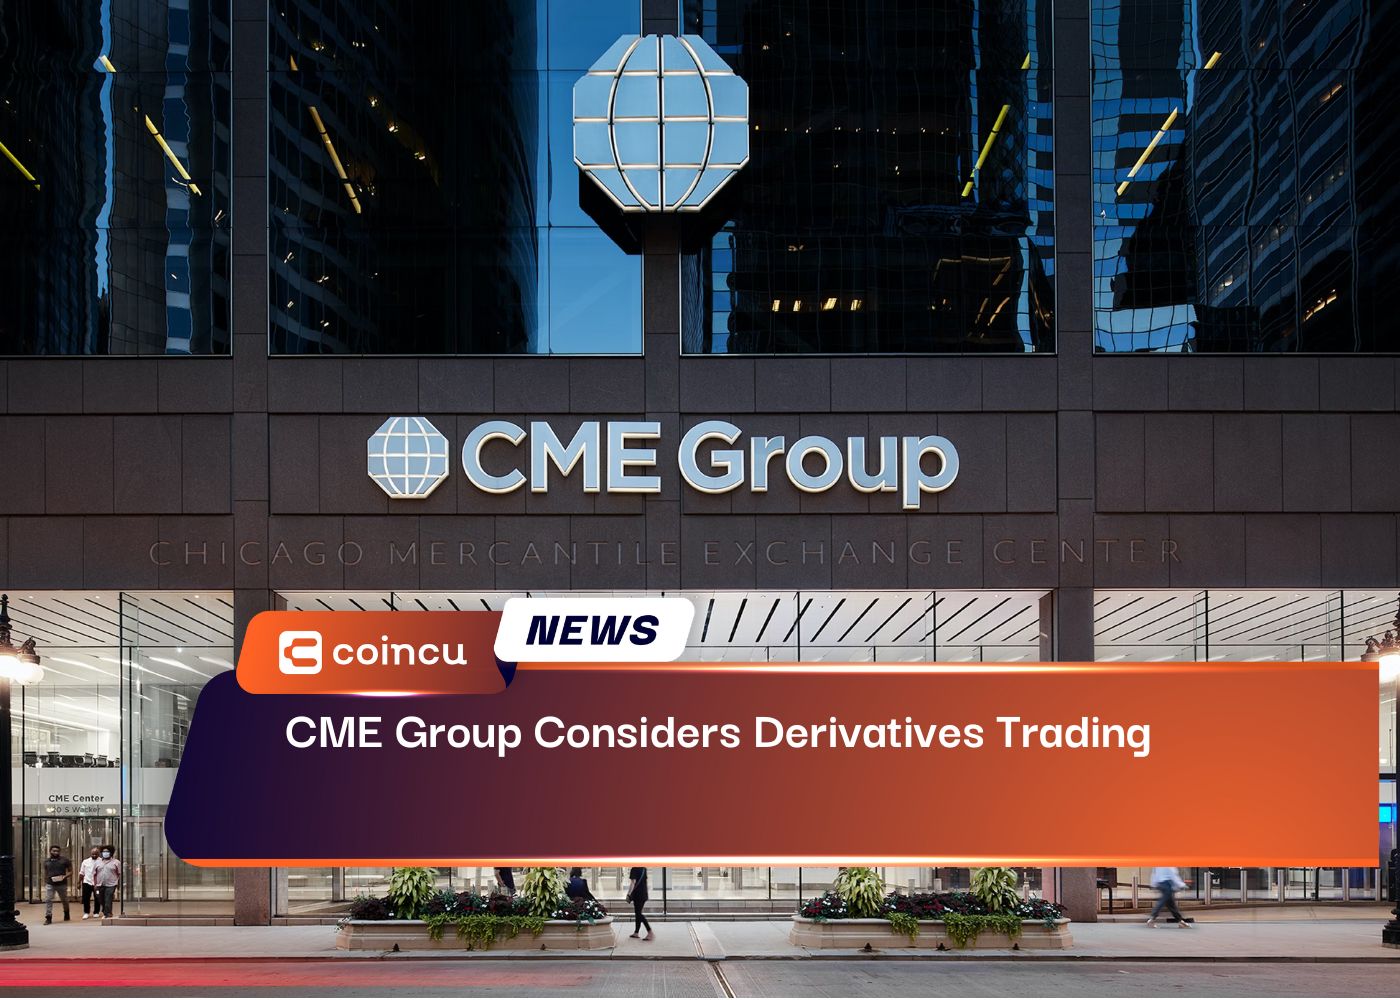 CME Group Considers Derivatives Trading